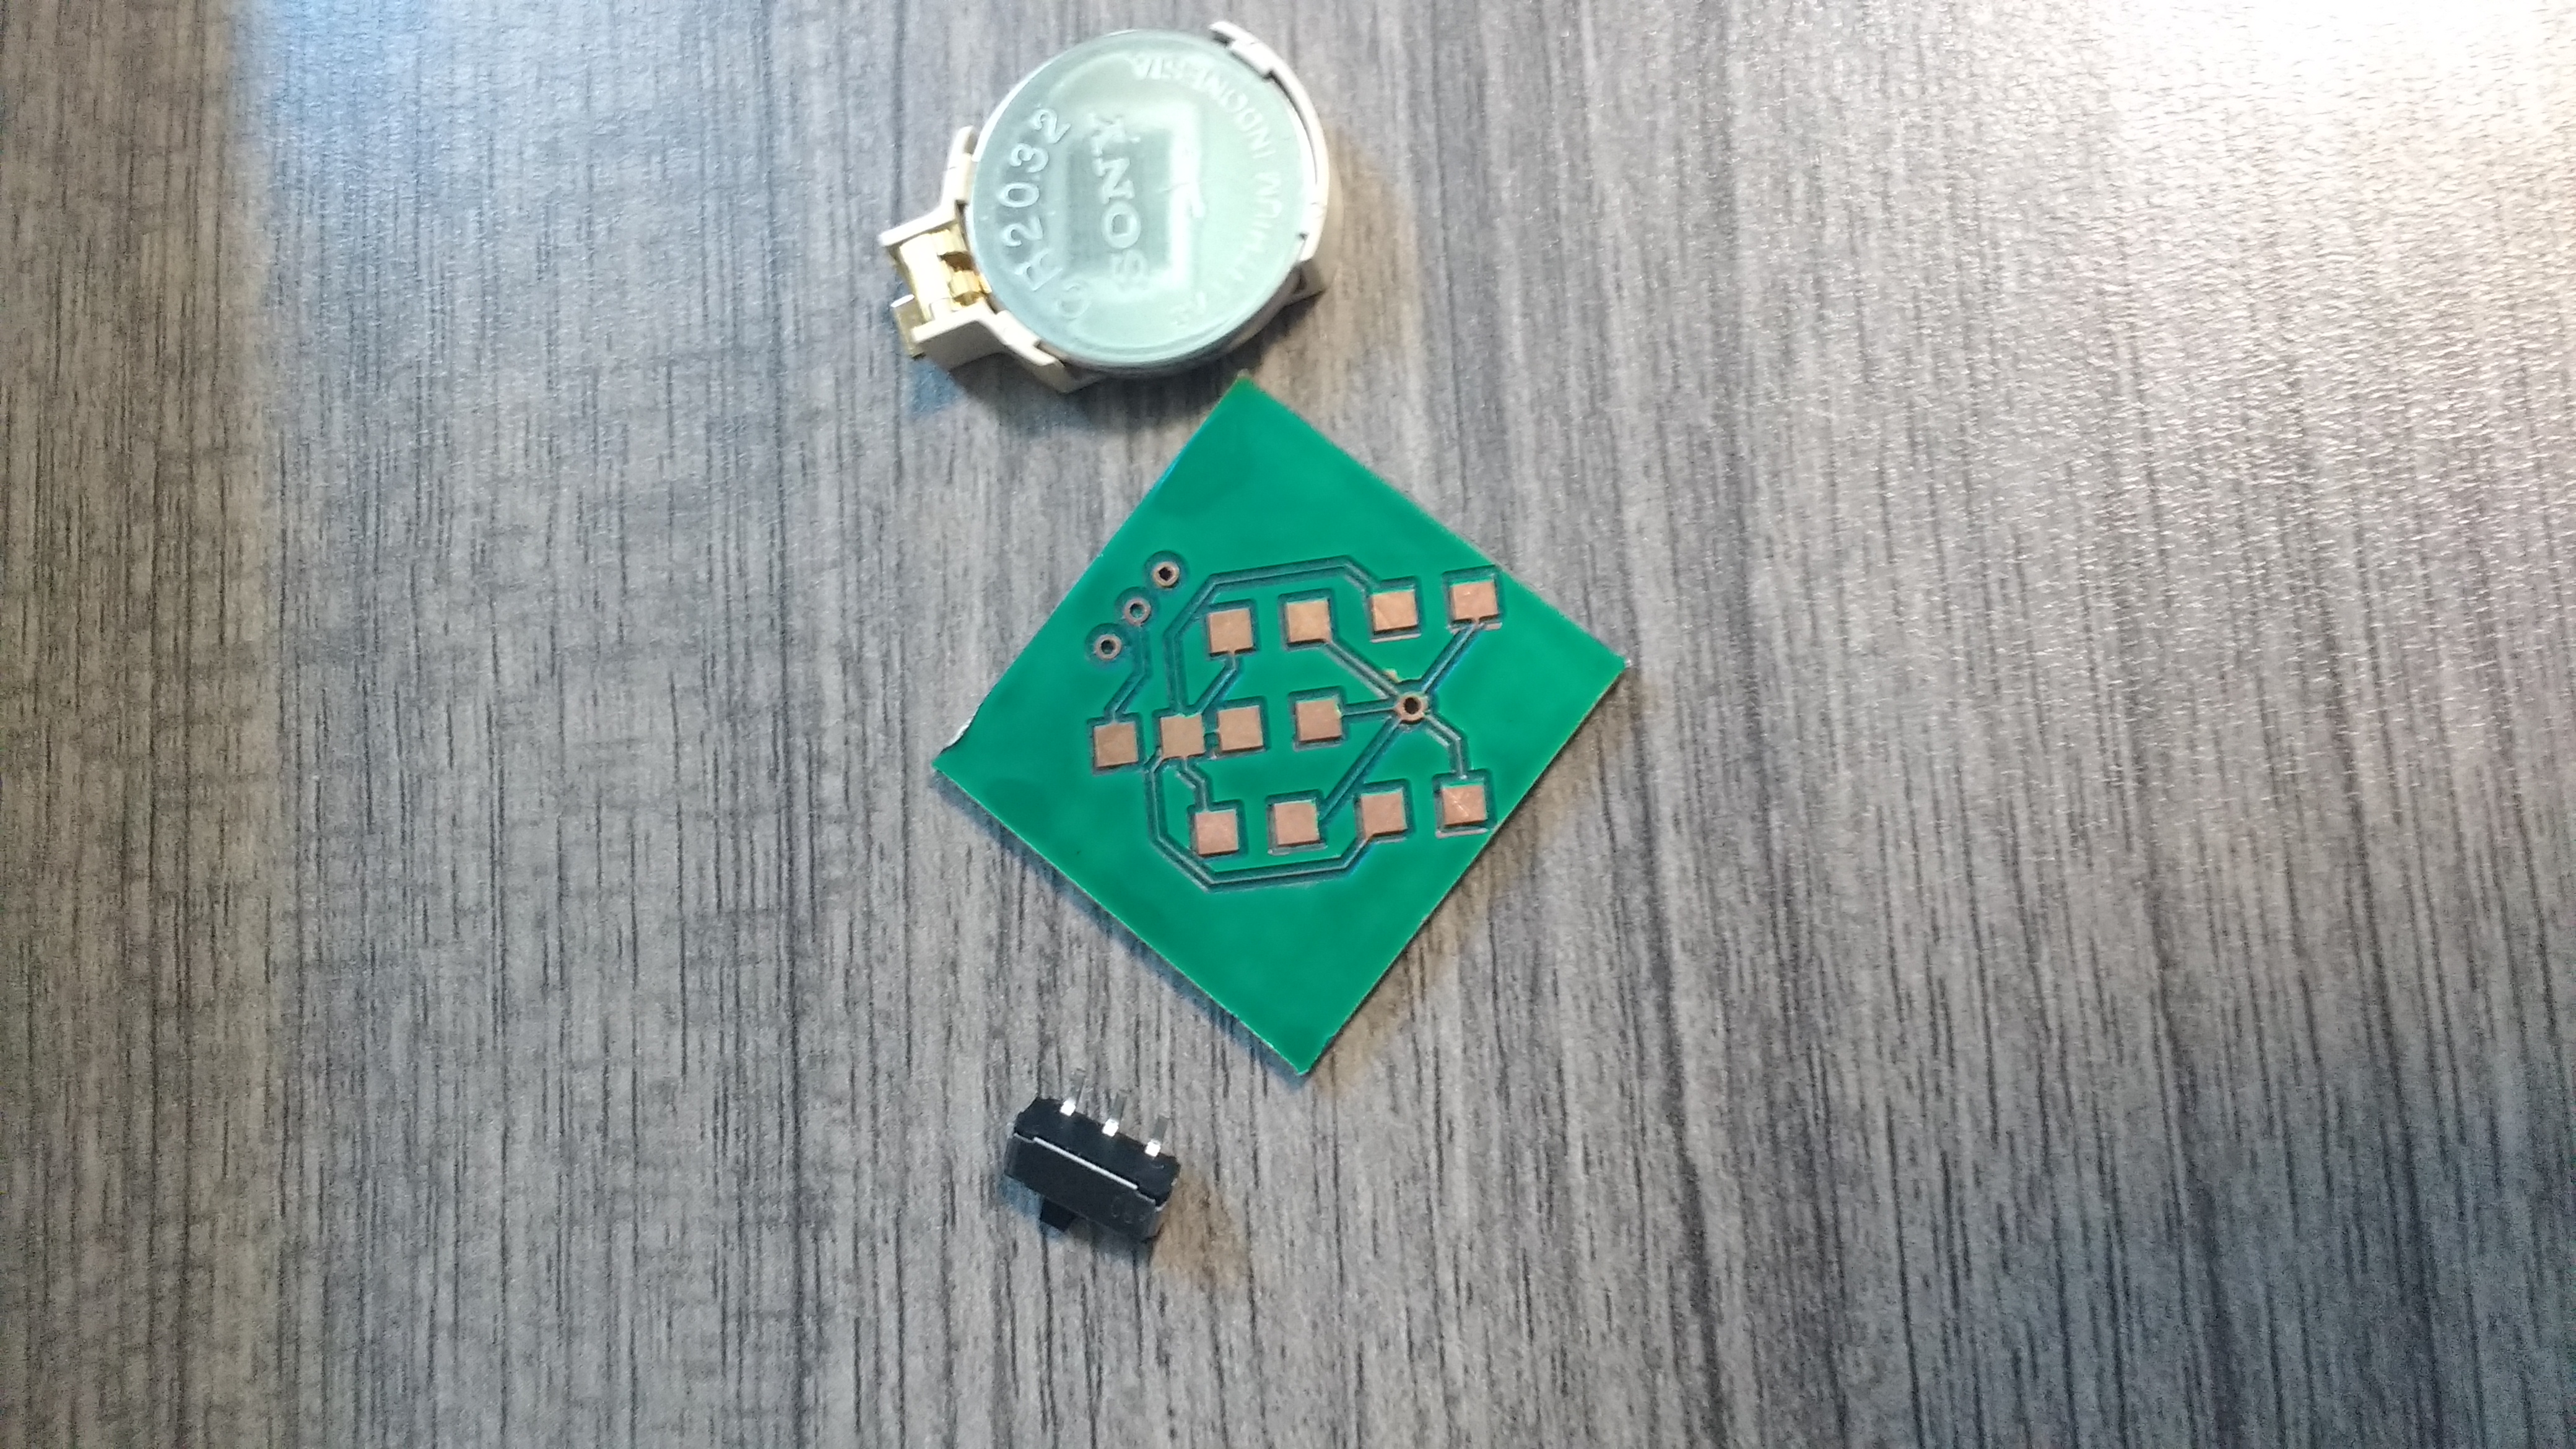 the top of a 1 inch by 1 inch copper PCB. It has green insulation on it, with large exposed copper pads for soldering leds and resistors.